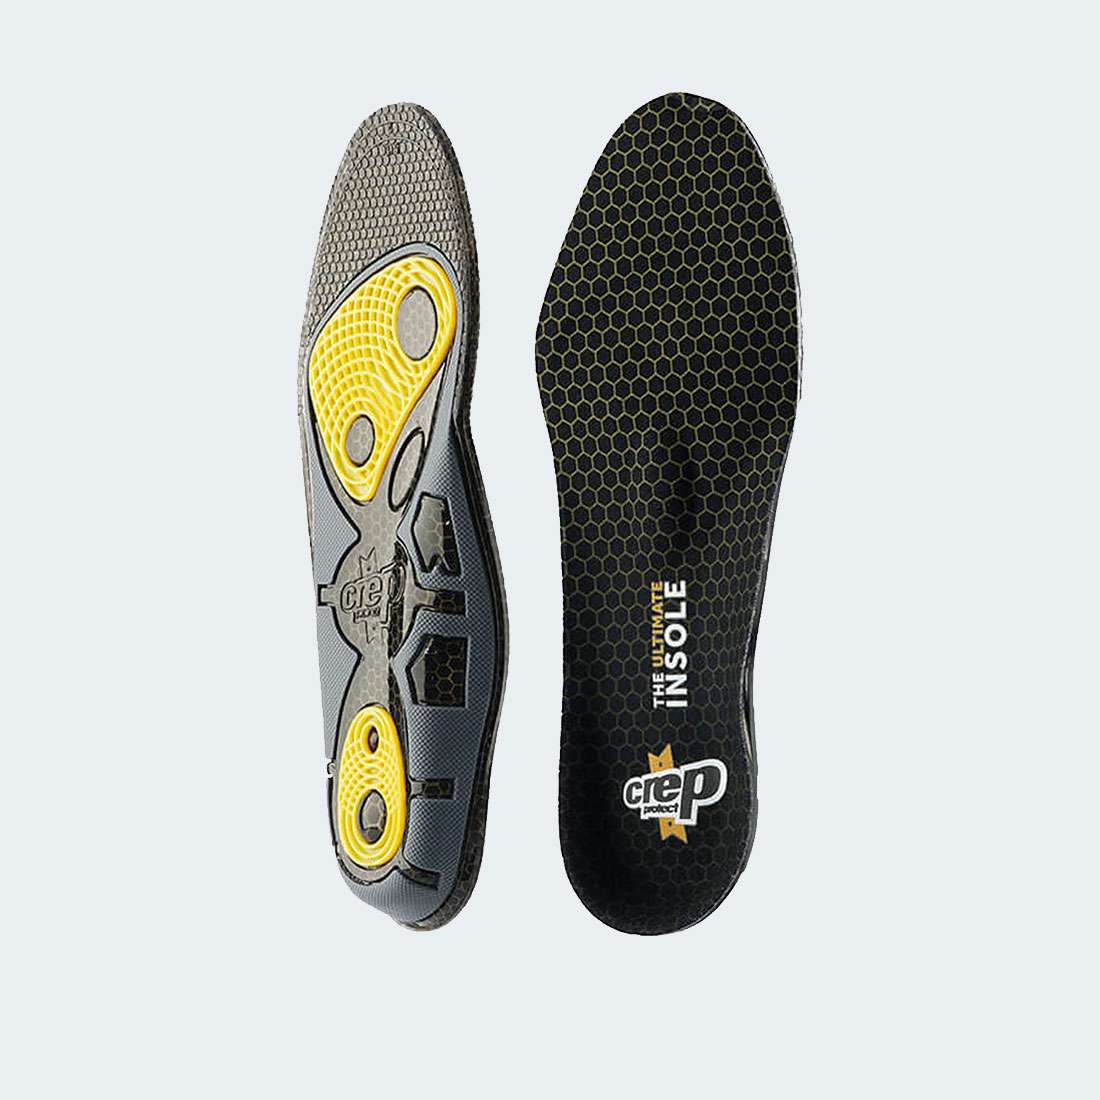 CREP PROTECT GEL INSOLES 44.5-45.5